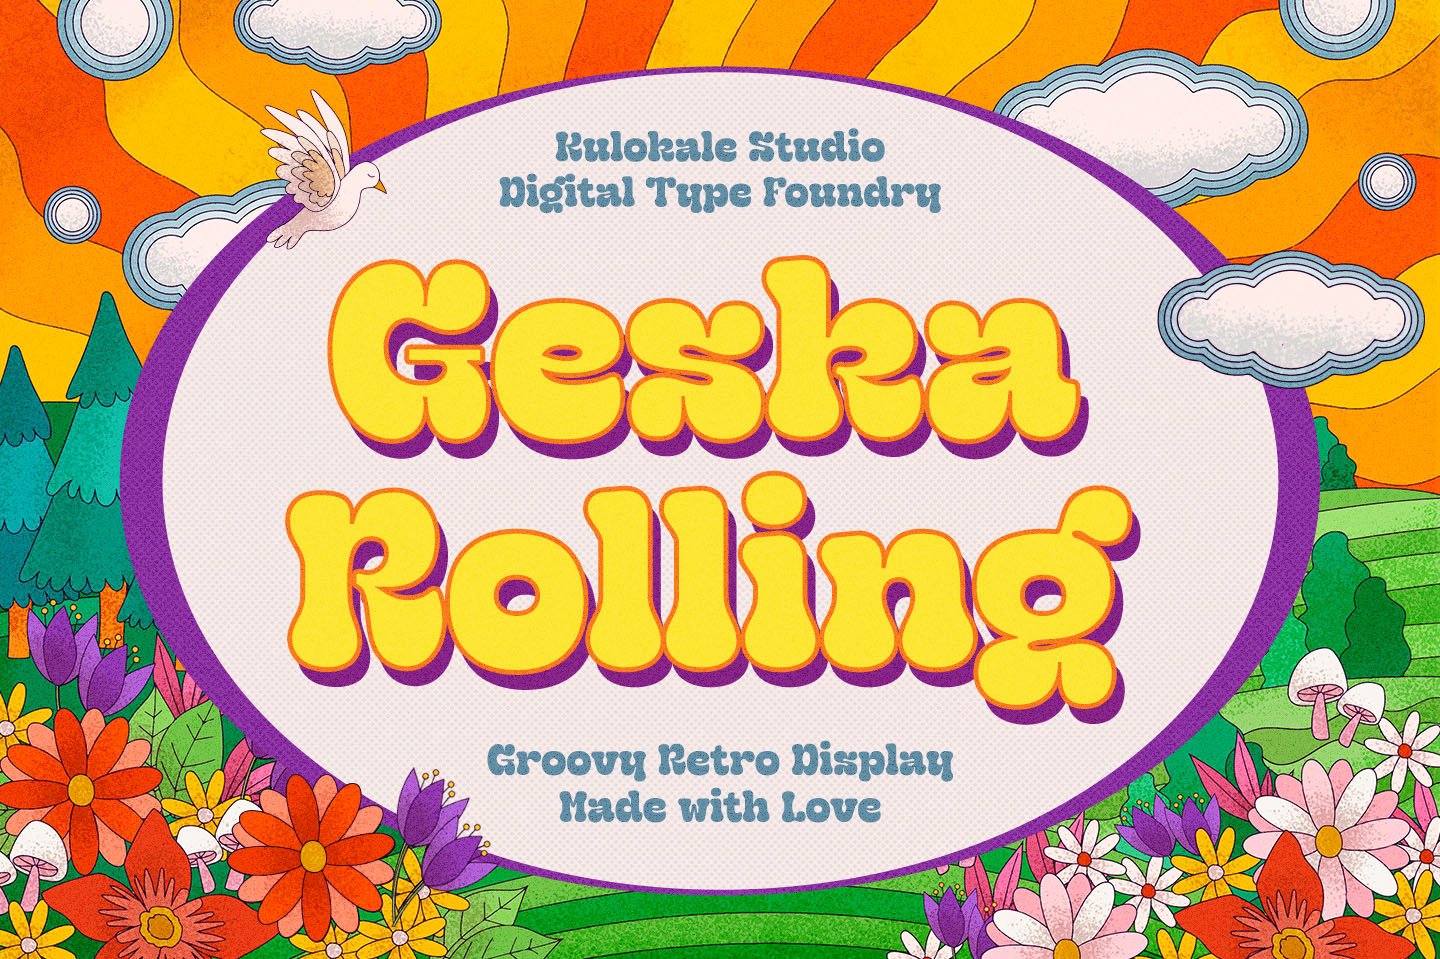 Geska Rolling - Groovy Retro Font cover image.